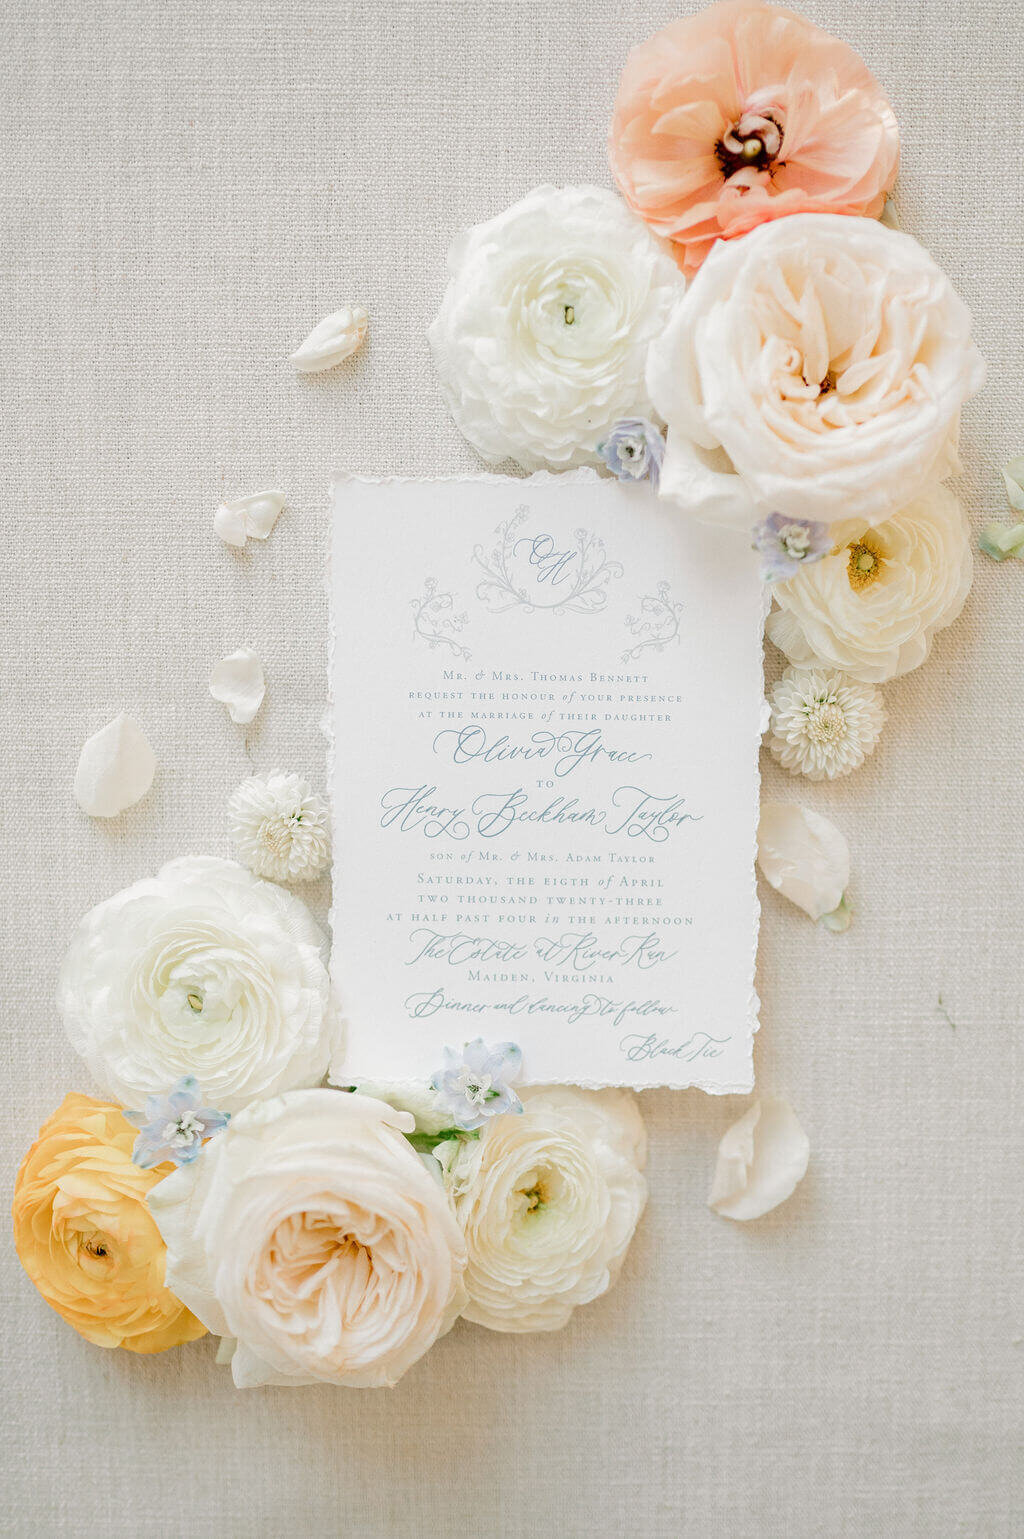 Wedding invitation surrounded by wedding florals for wedding flatlay photography